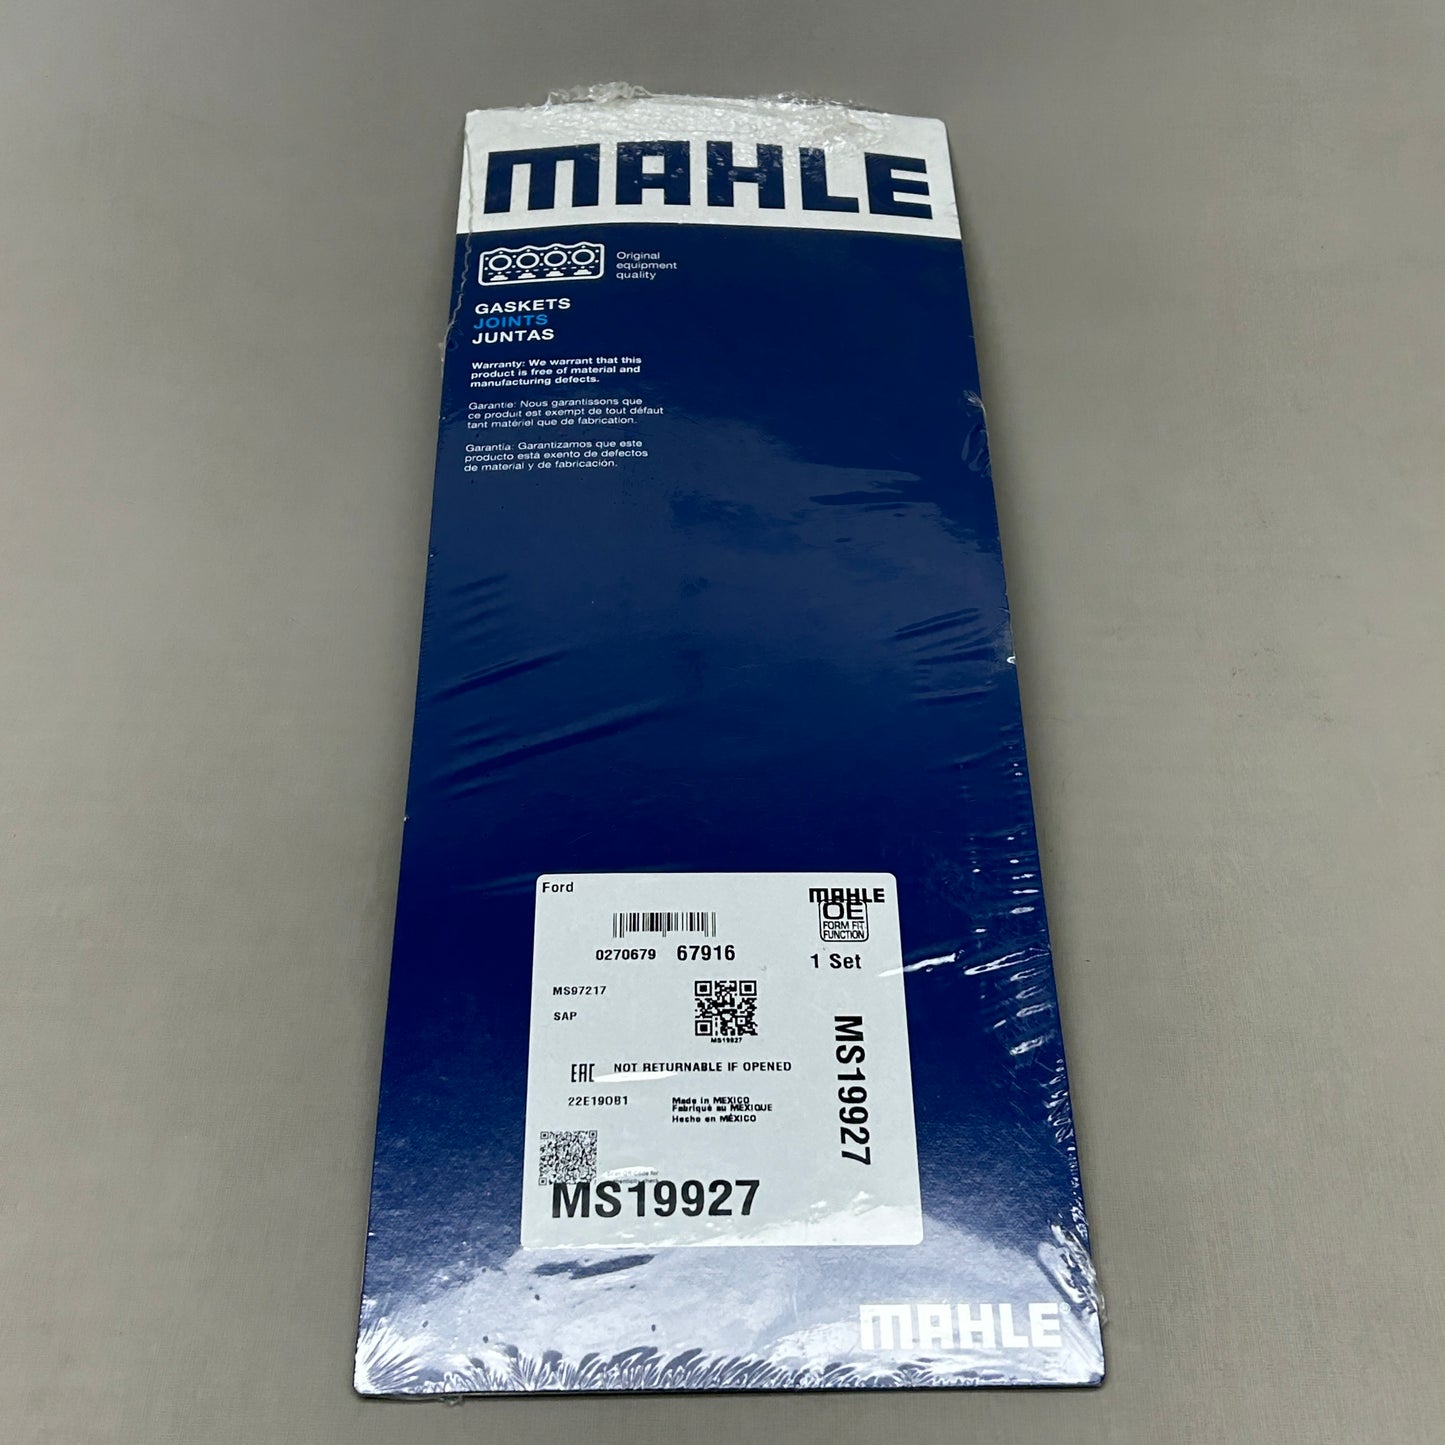 MAHLE Exhaust Manifold Gasket Set of 2 for Ford MS19927 (New)